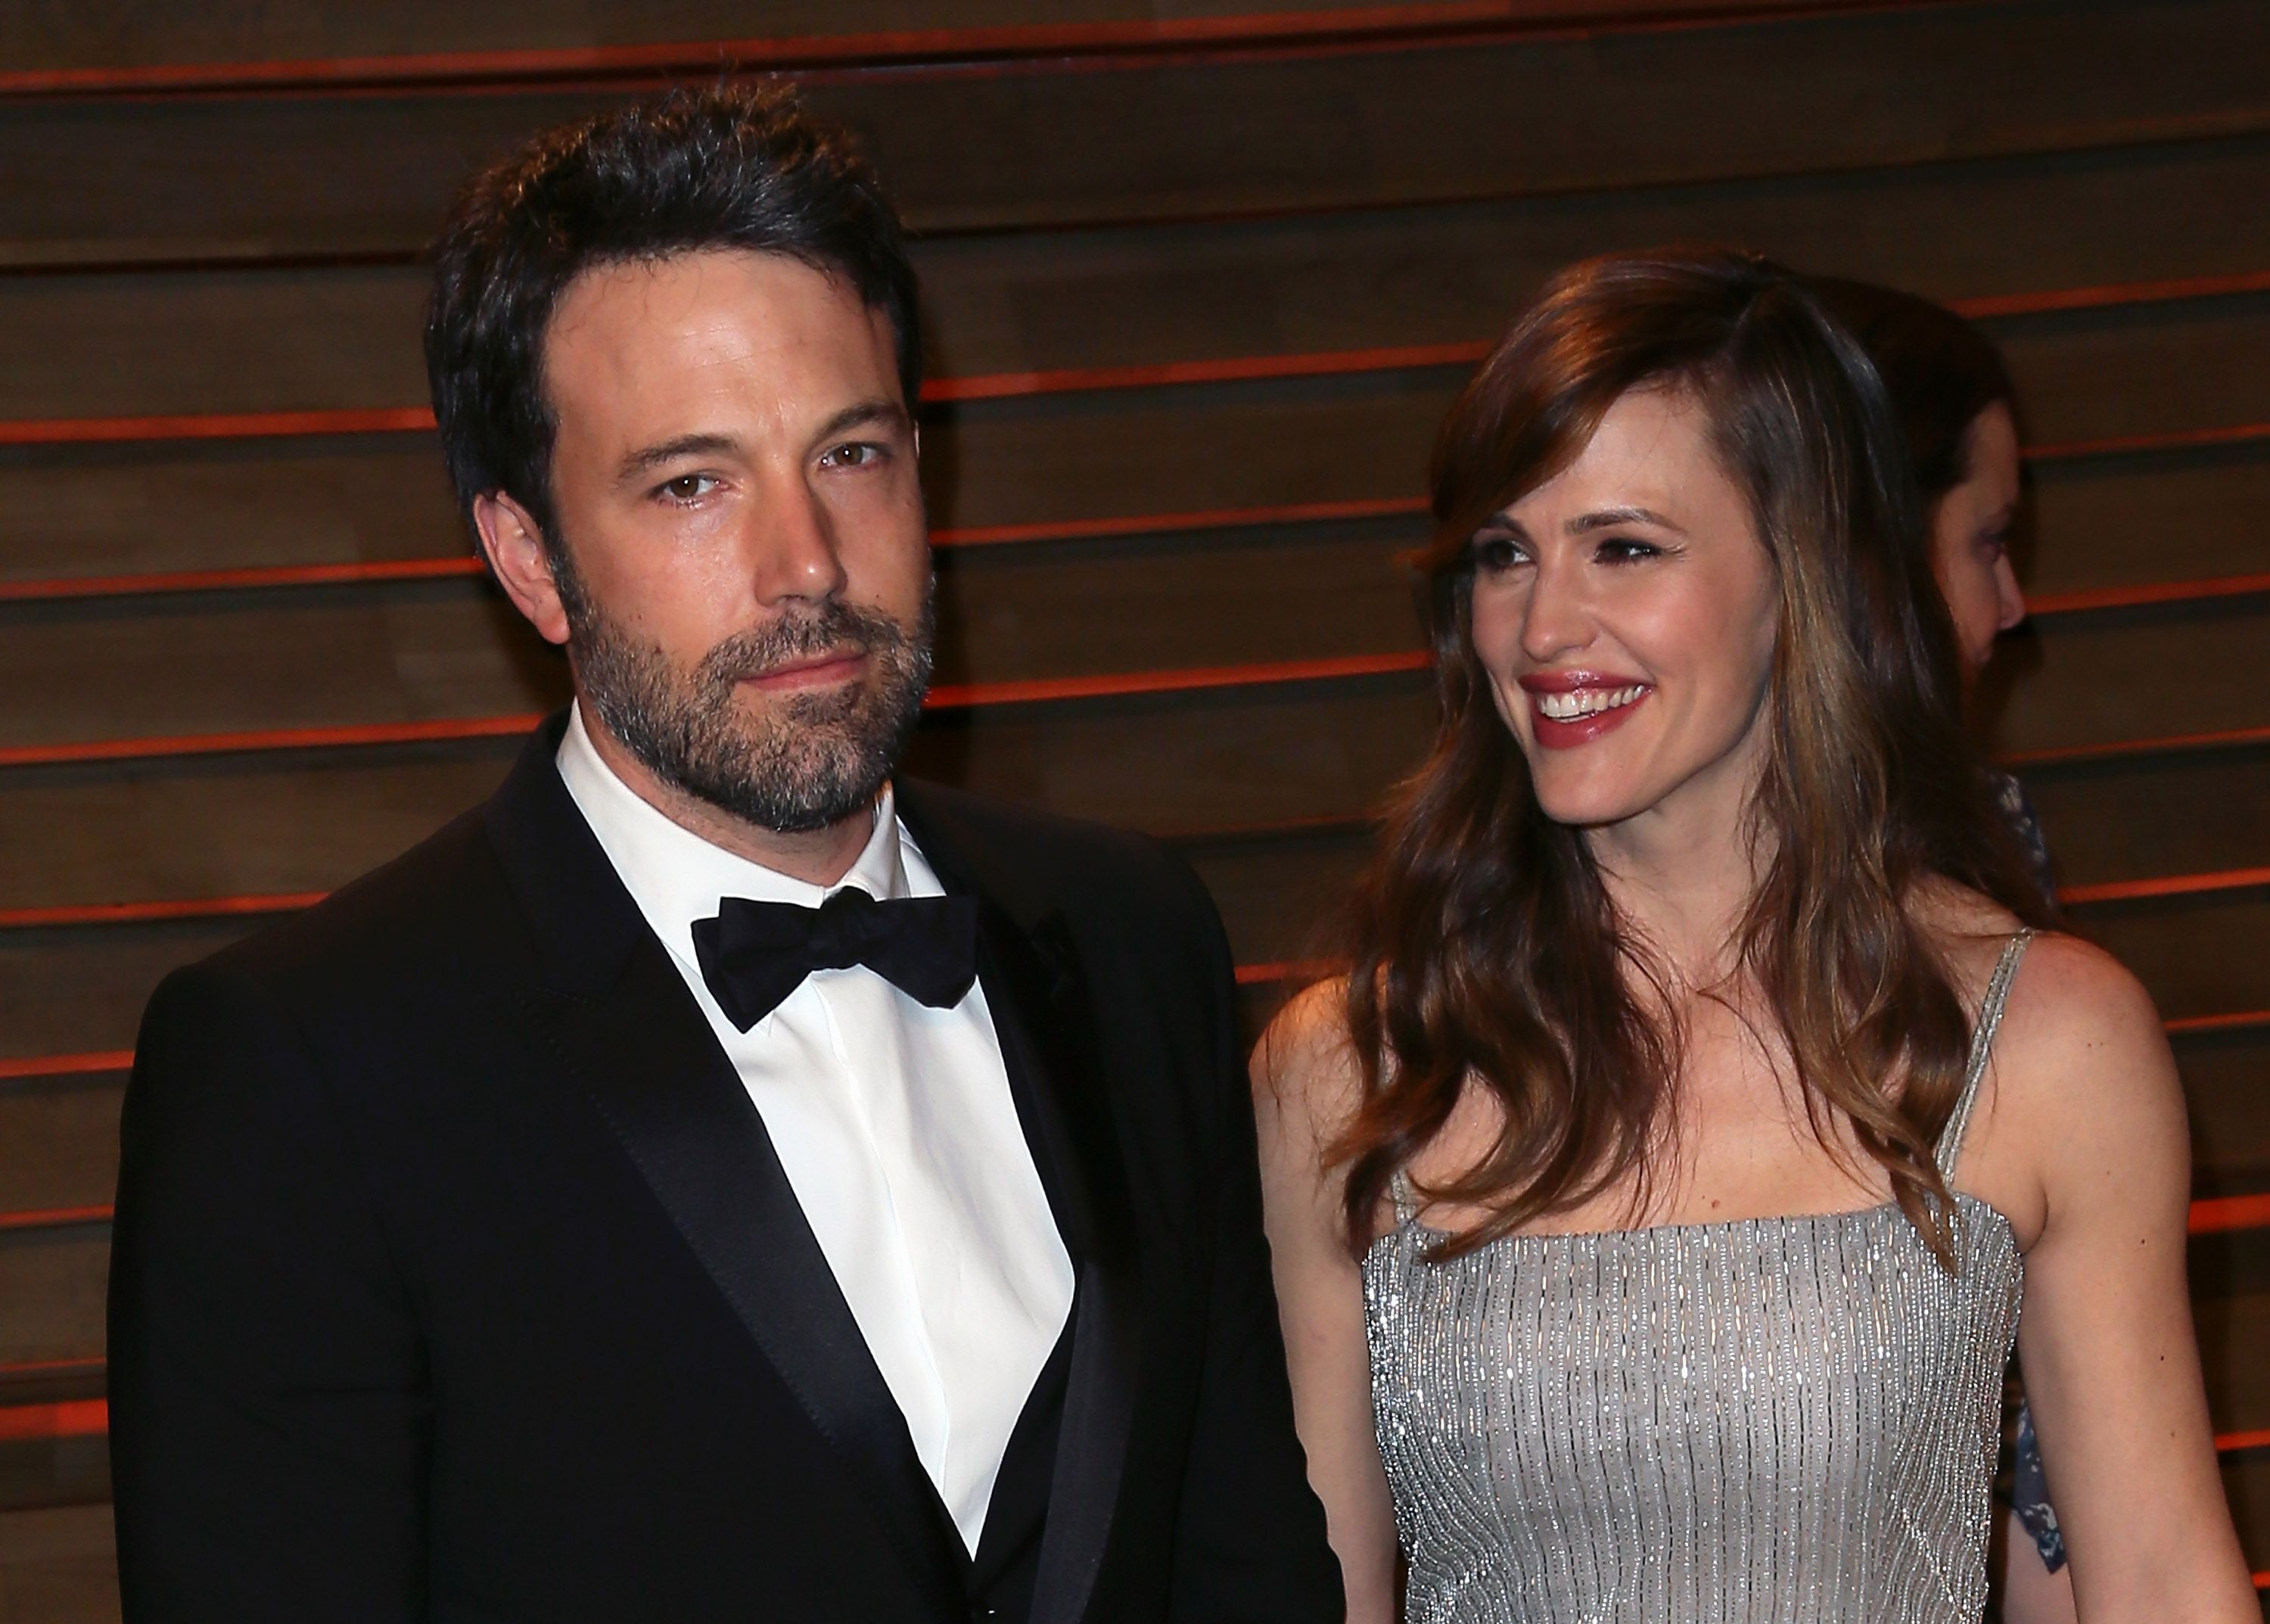  Ben Affleck and Jennifer Garner attend the 2014 Vanity Fair Oscar Party hosted by Graydon Carter on March 2, 2014 in West Hollywood, California. | Source: Getty Images